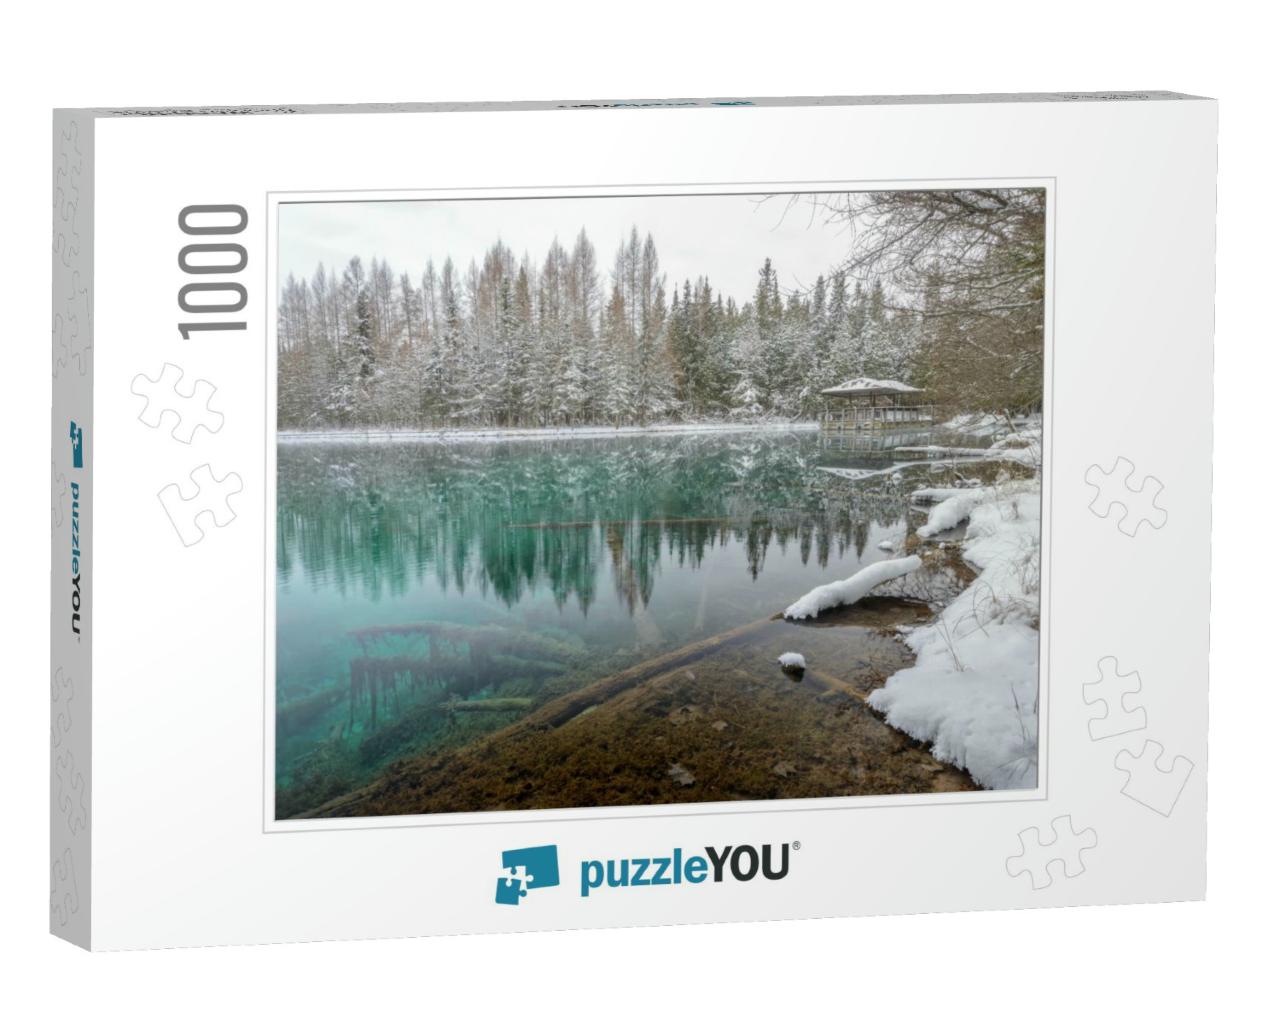 Kitch-Iti-Kipi, Big Spring. Fresh Snow in the Forest Alon... Jigsaw Puzzle with 1000 pieces